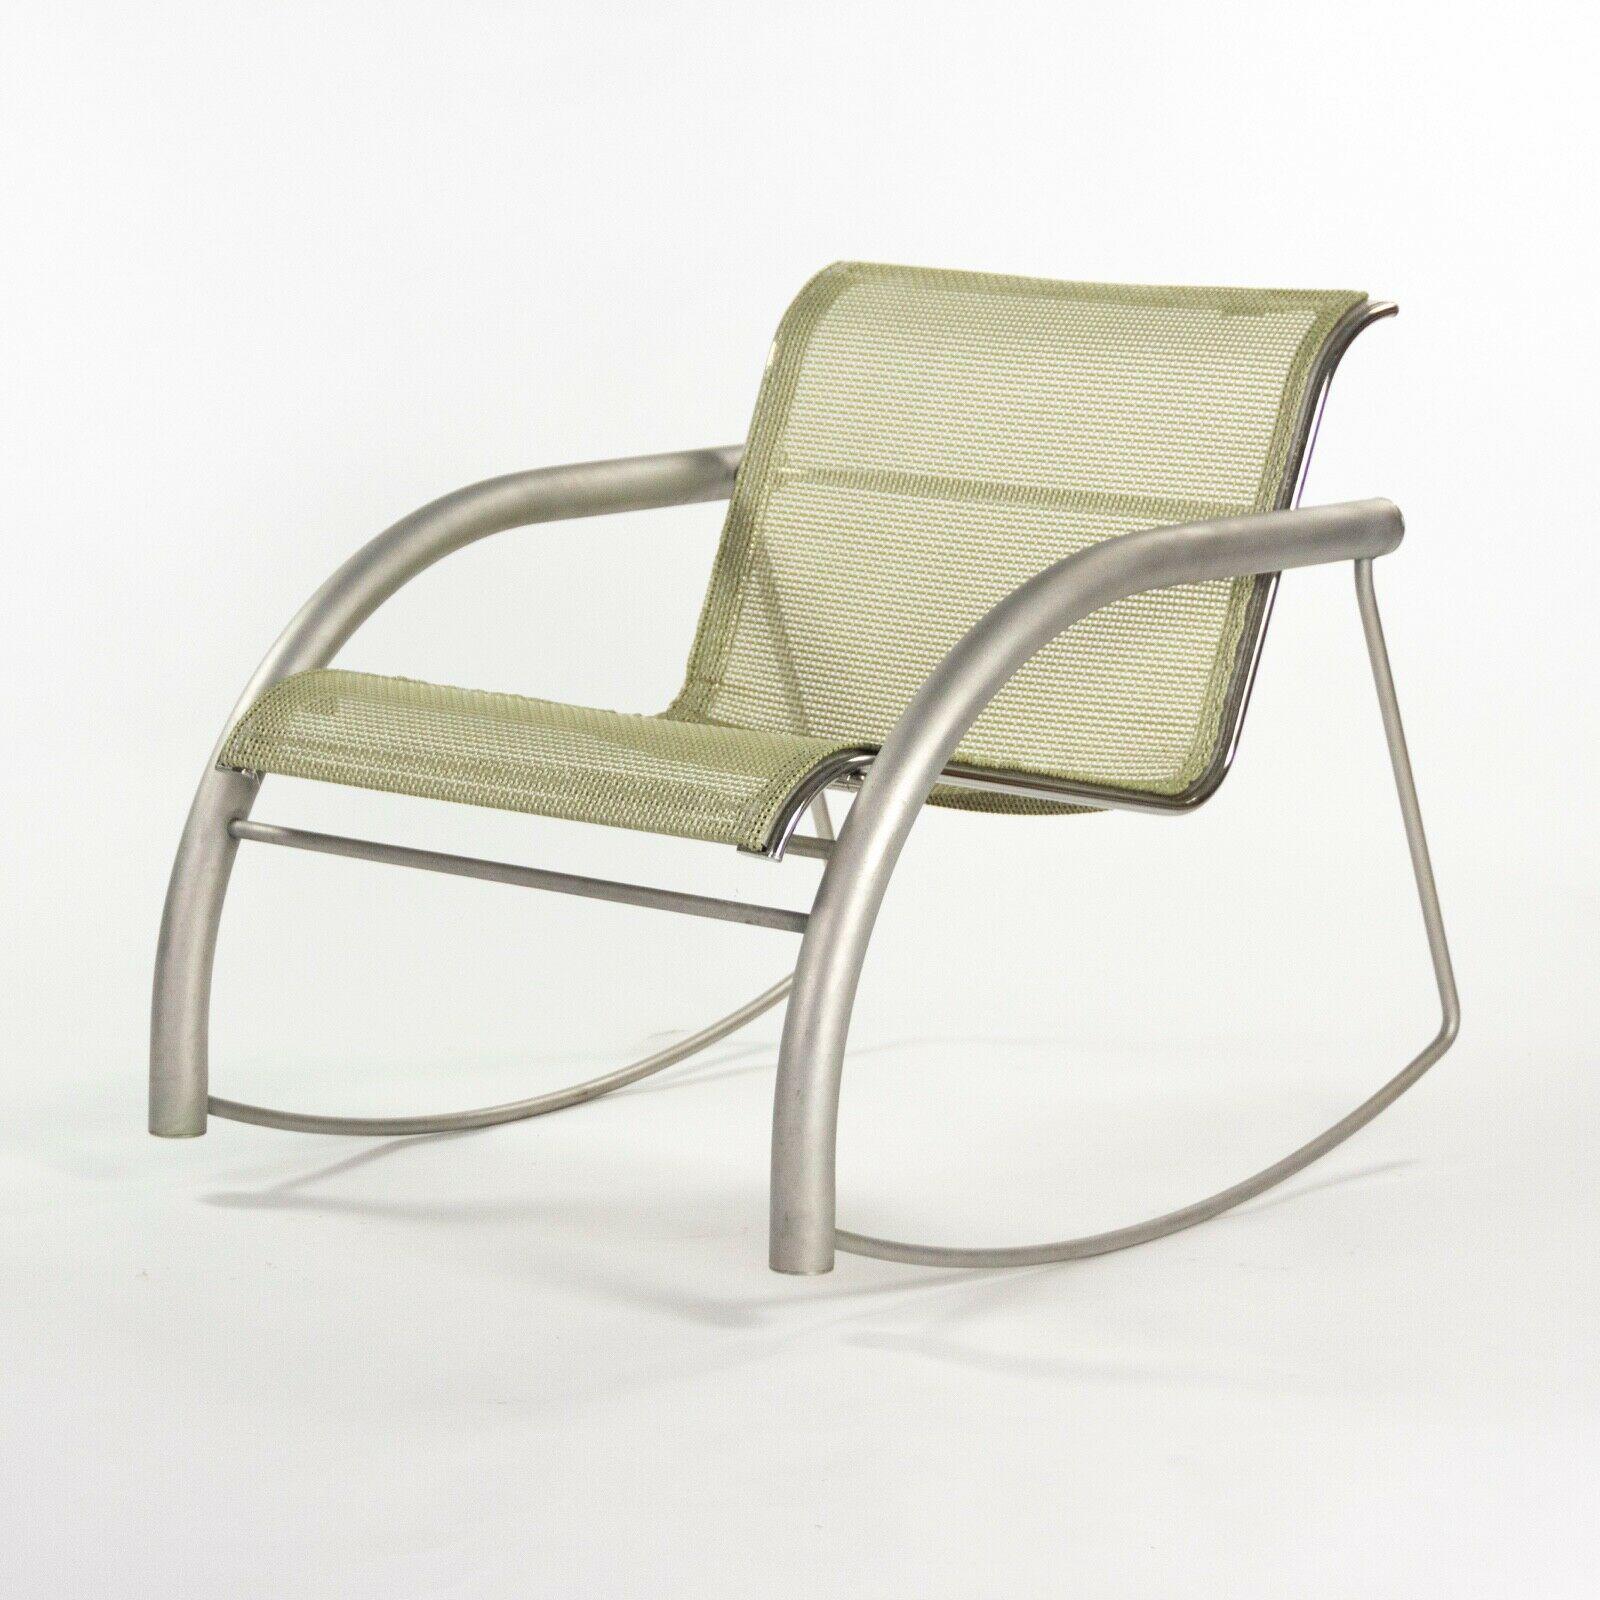 Prototype Richard Schultz 2002 Collection Stainless Steel & Mesh Rocking Chair For Sale 3